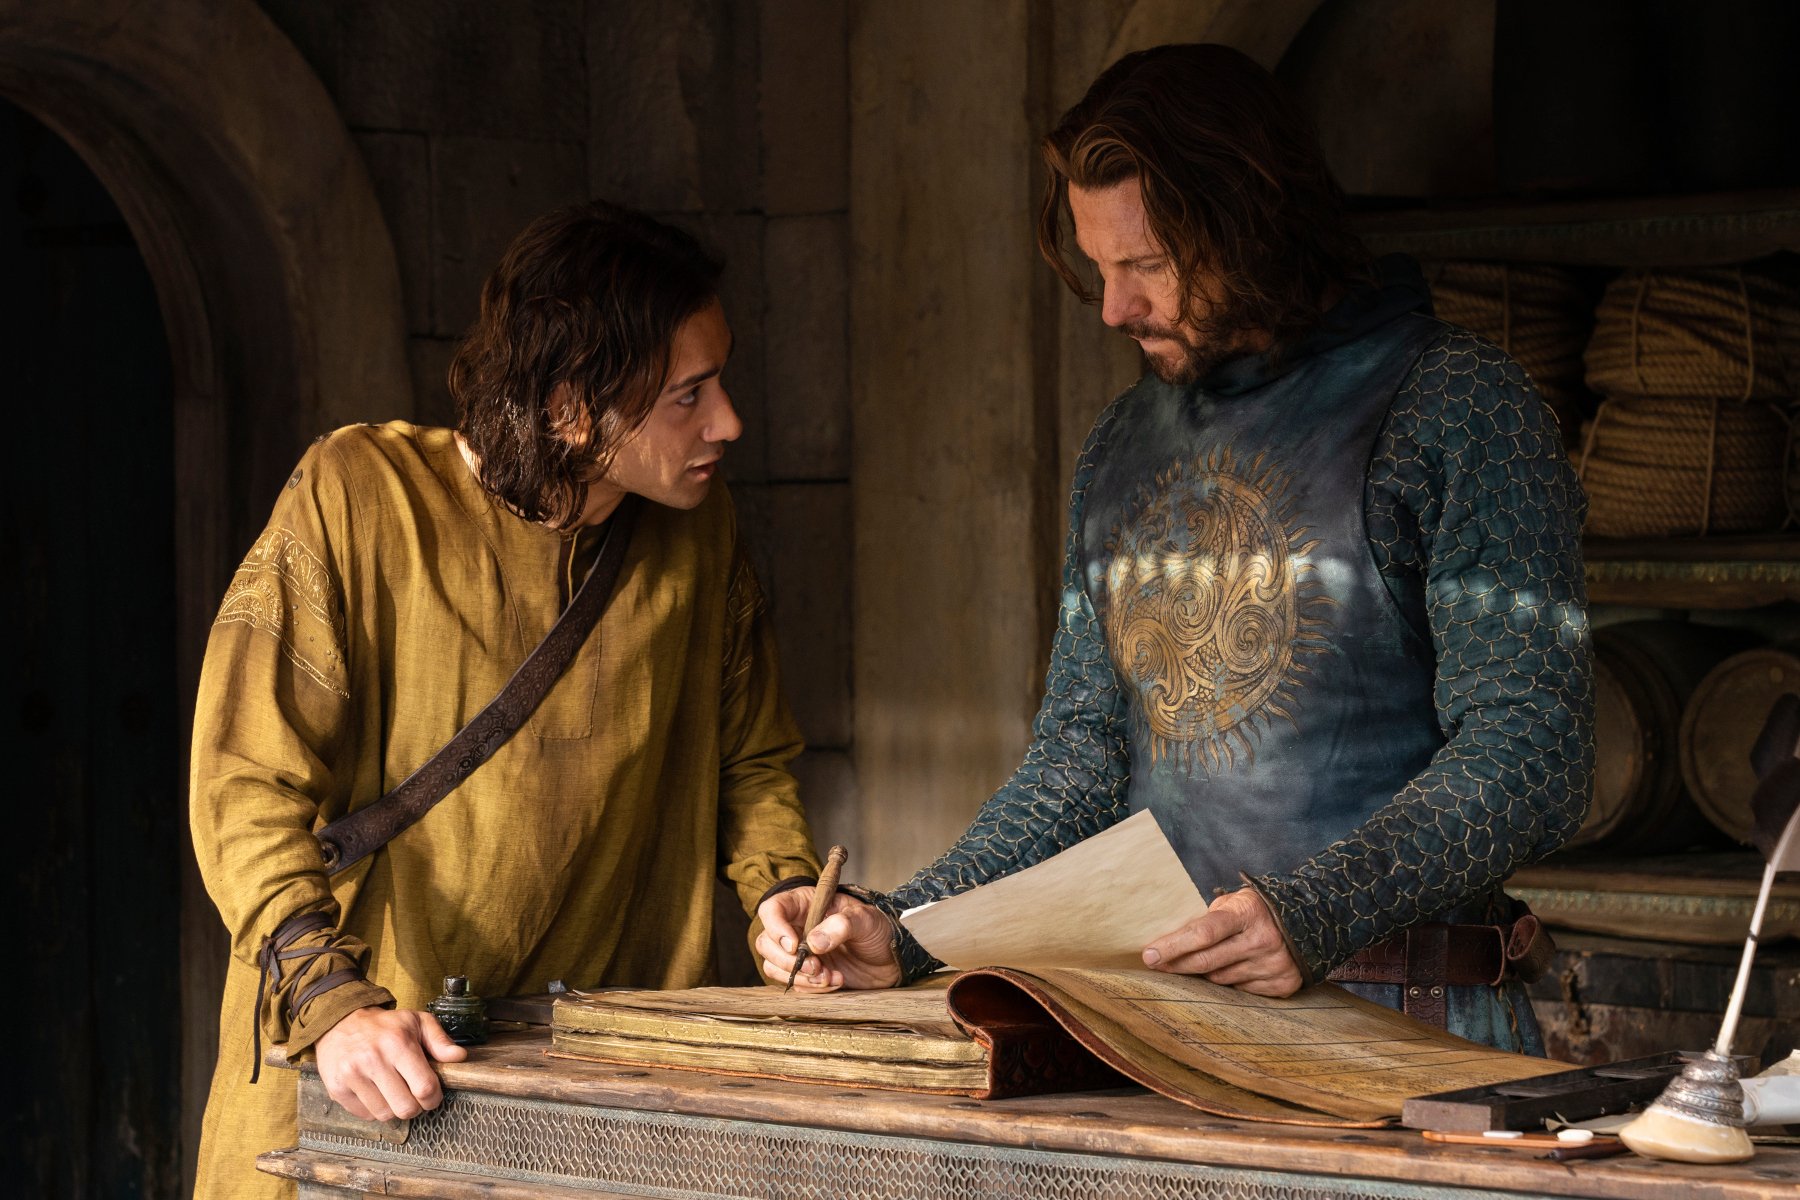 Maxim Baldry and Lloyd Owen as Isildur and Elendil in 'The Rings of Power' Episode 5 for our article about its Easter Eggs. Isildur is leaning over a table and talking to his father, and Elendil is writing on paper and listening.